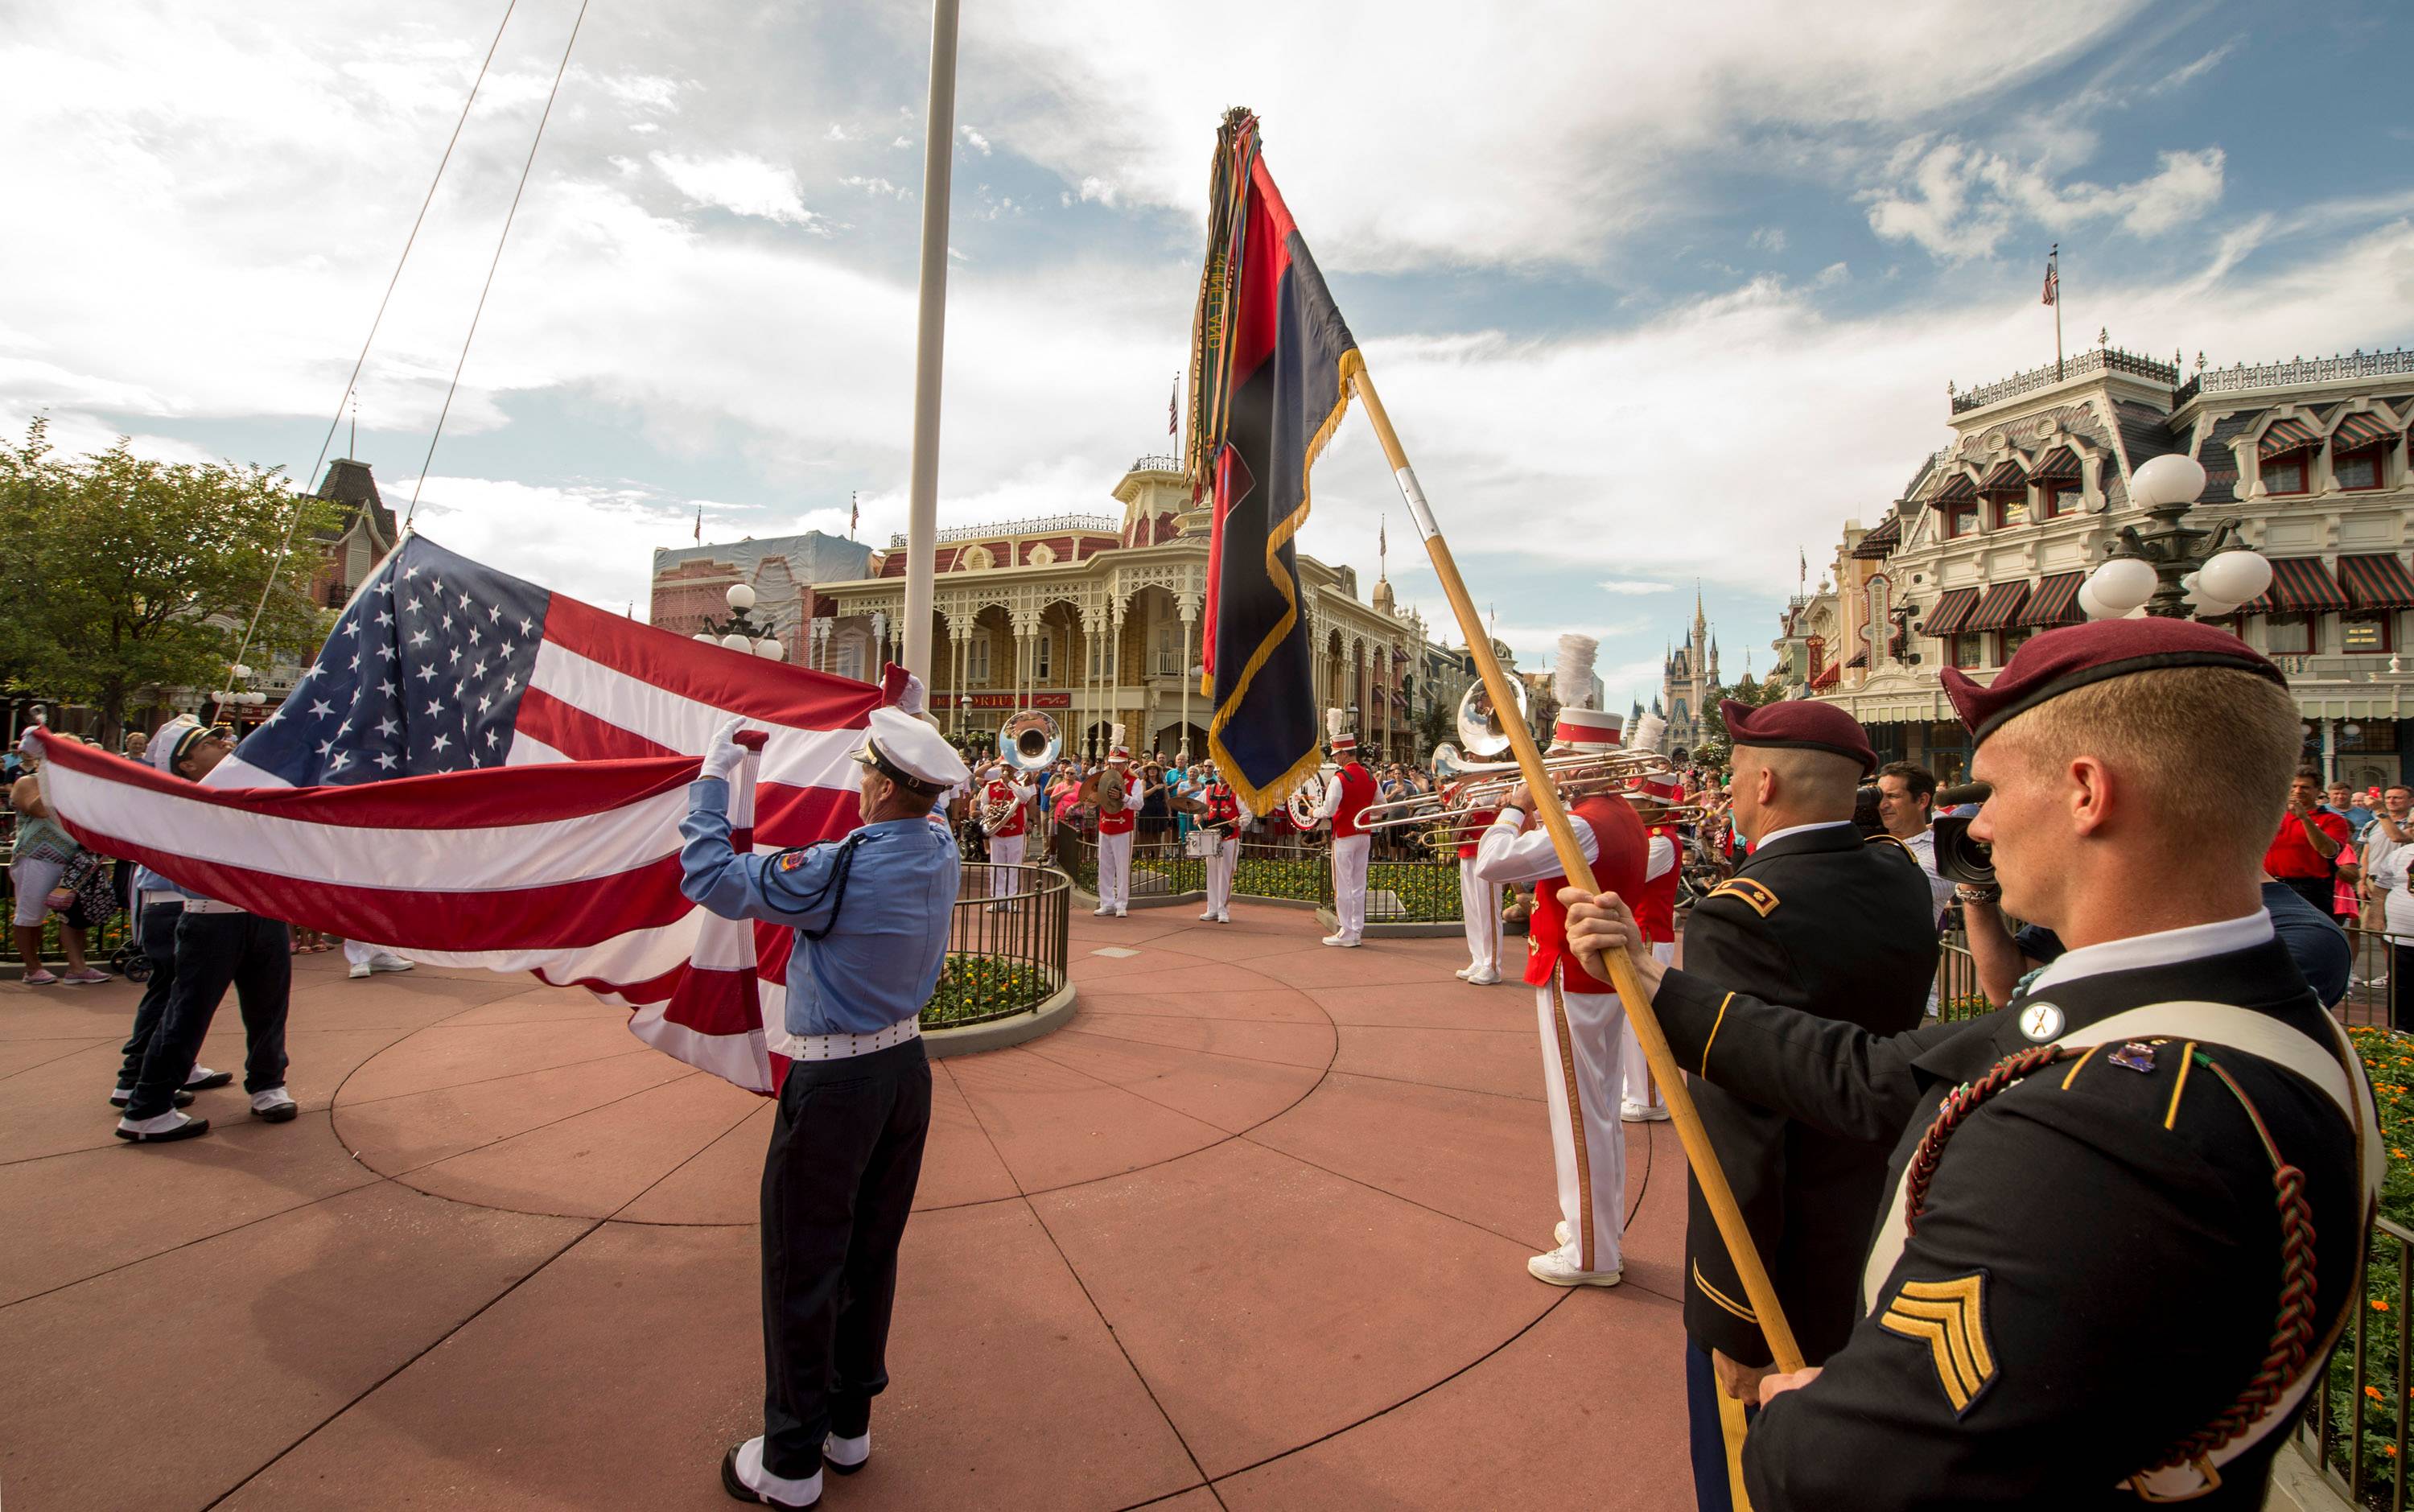 U.S. Army's 82nd Airborne Division Celebrated at Walt Disney World